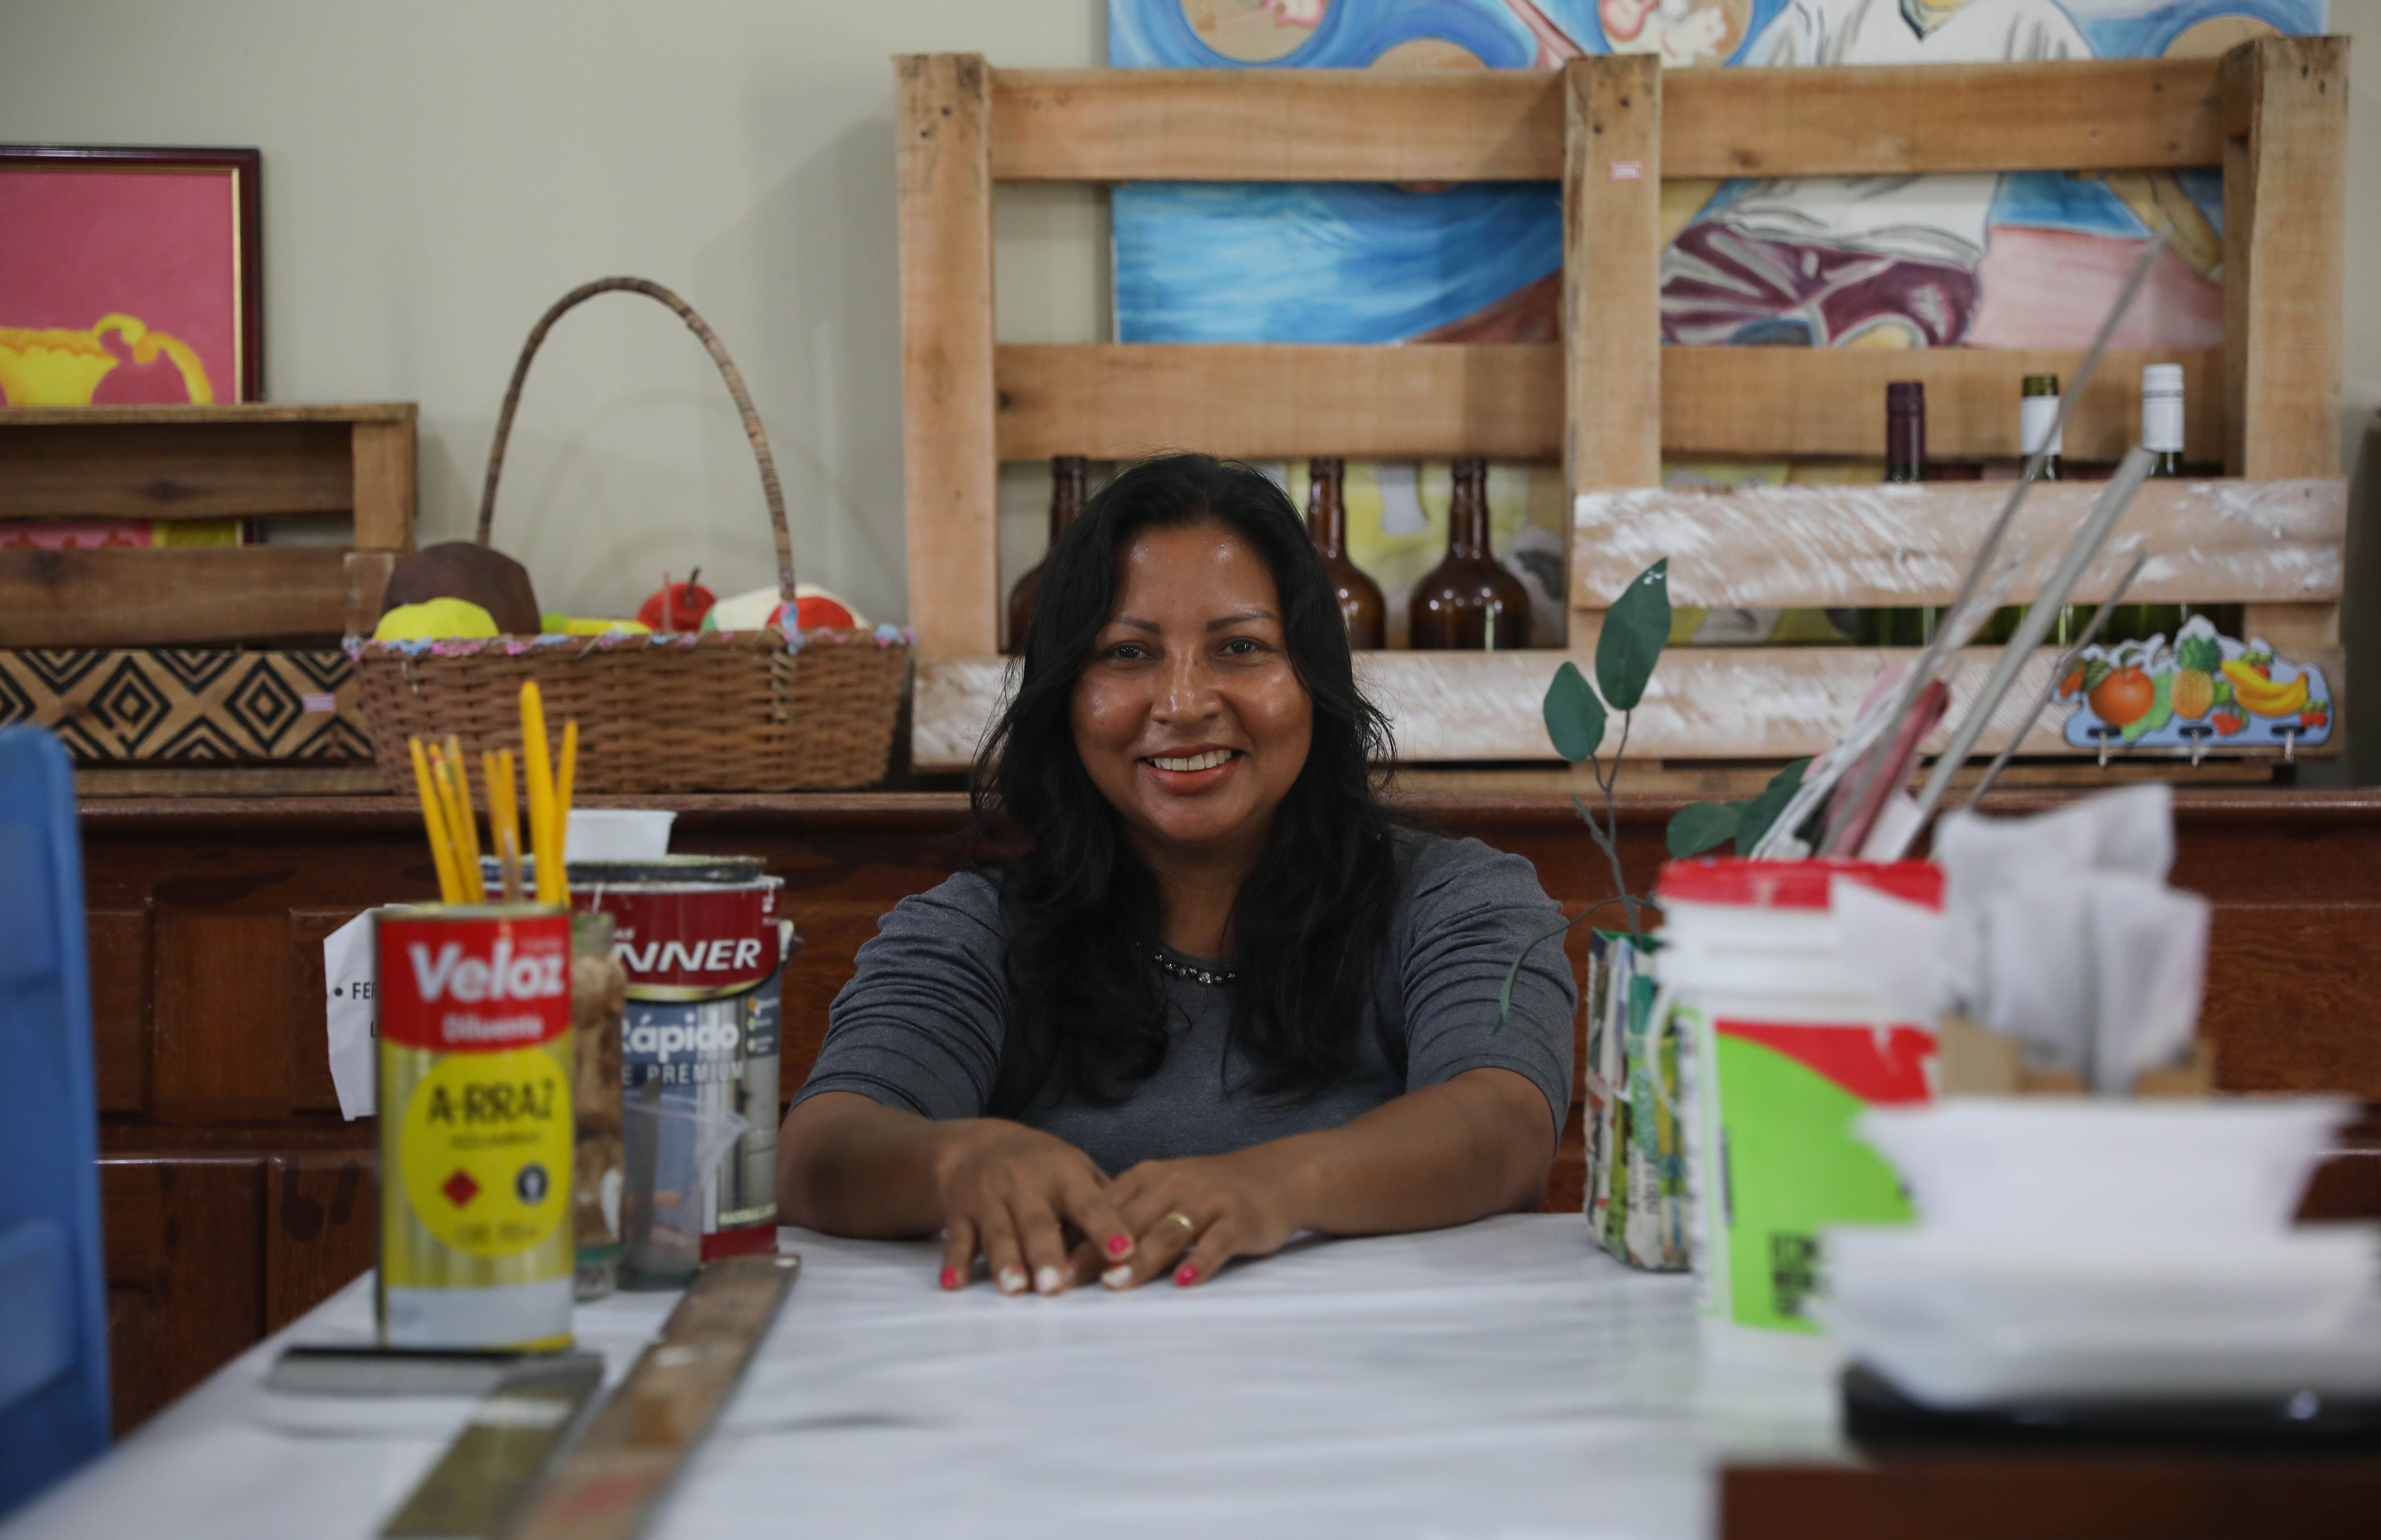 Ediana Barbosa has been teaching in Marituba since the inception of the educational pilot program. While originally nervous to teach older students, Barbosa said “It is really gratifying. It is such a great experience teaching elderly people.” Image by Anton L. Delgado. Brazil, 2020.